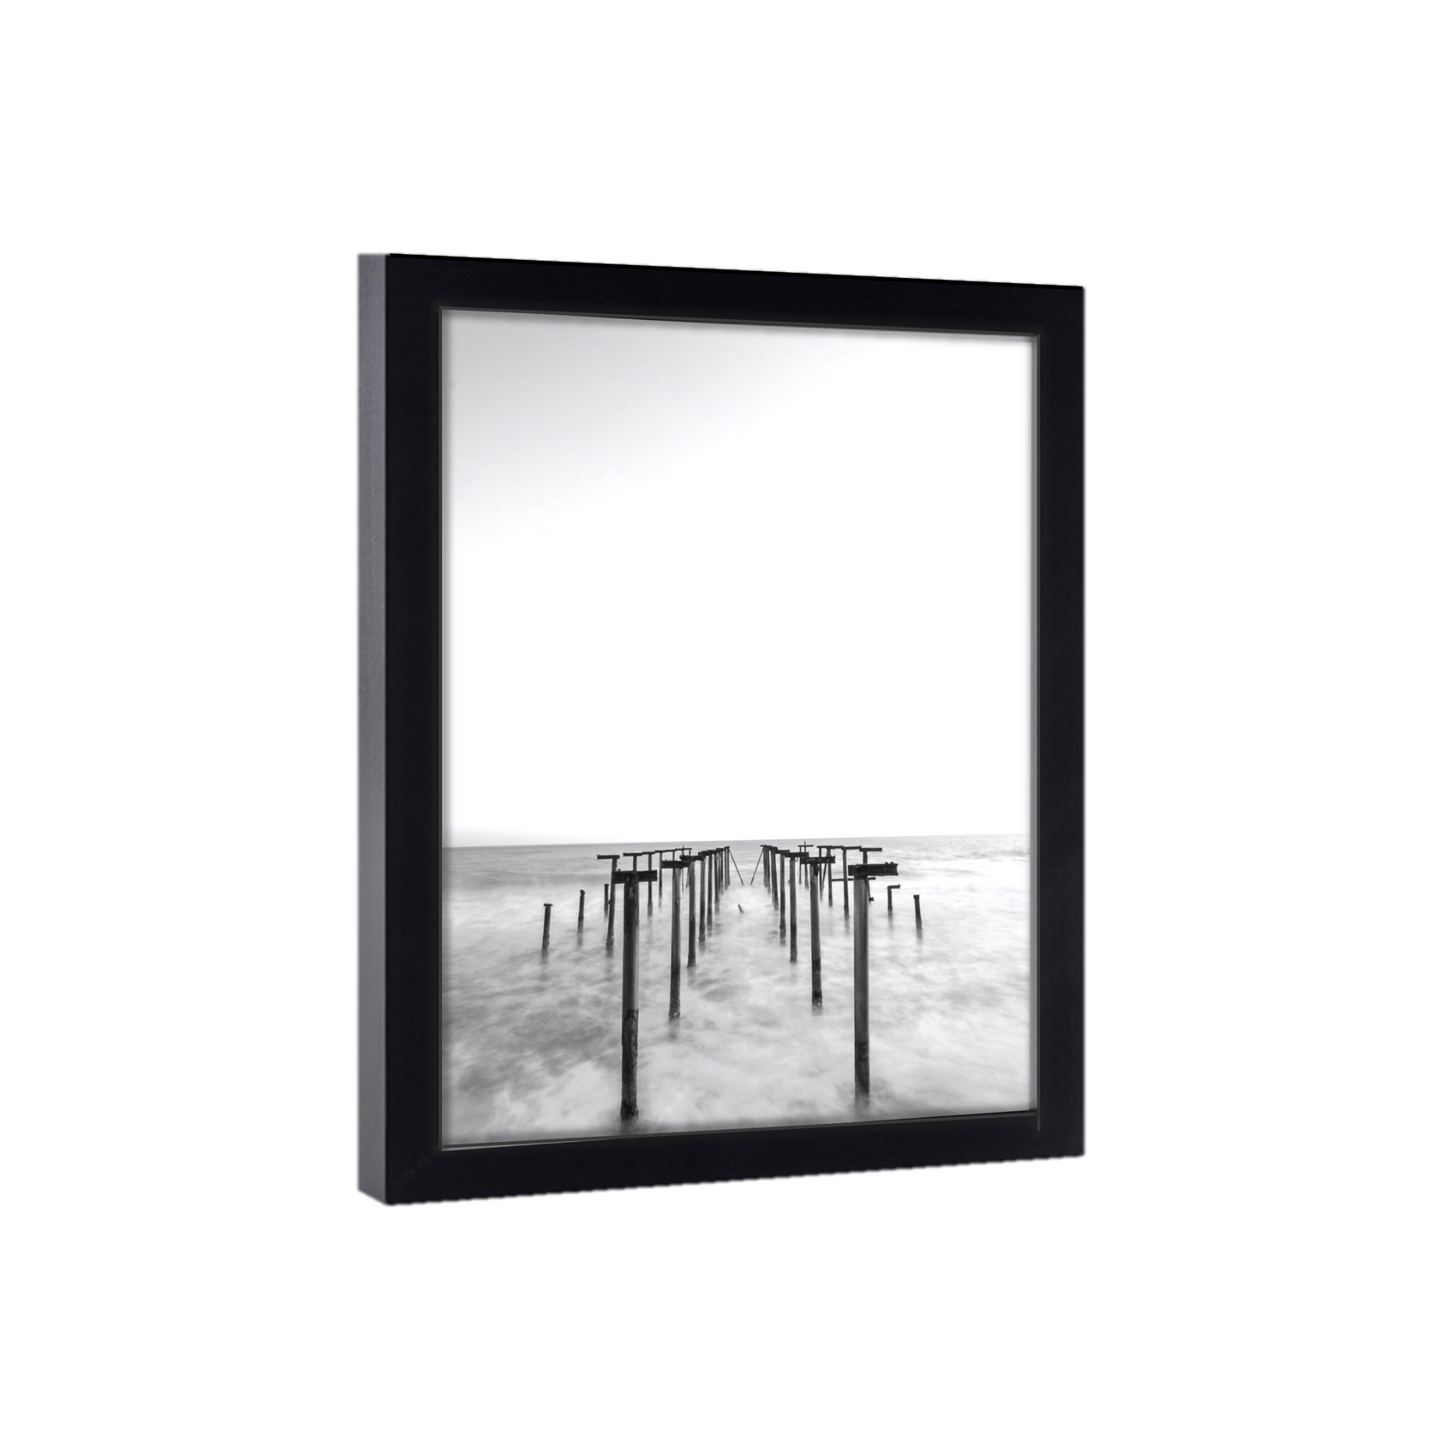 Gallery Wall 8x35 Picture Frame Black Wood 8x35  Poster Size